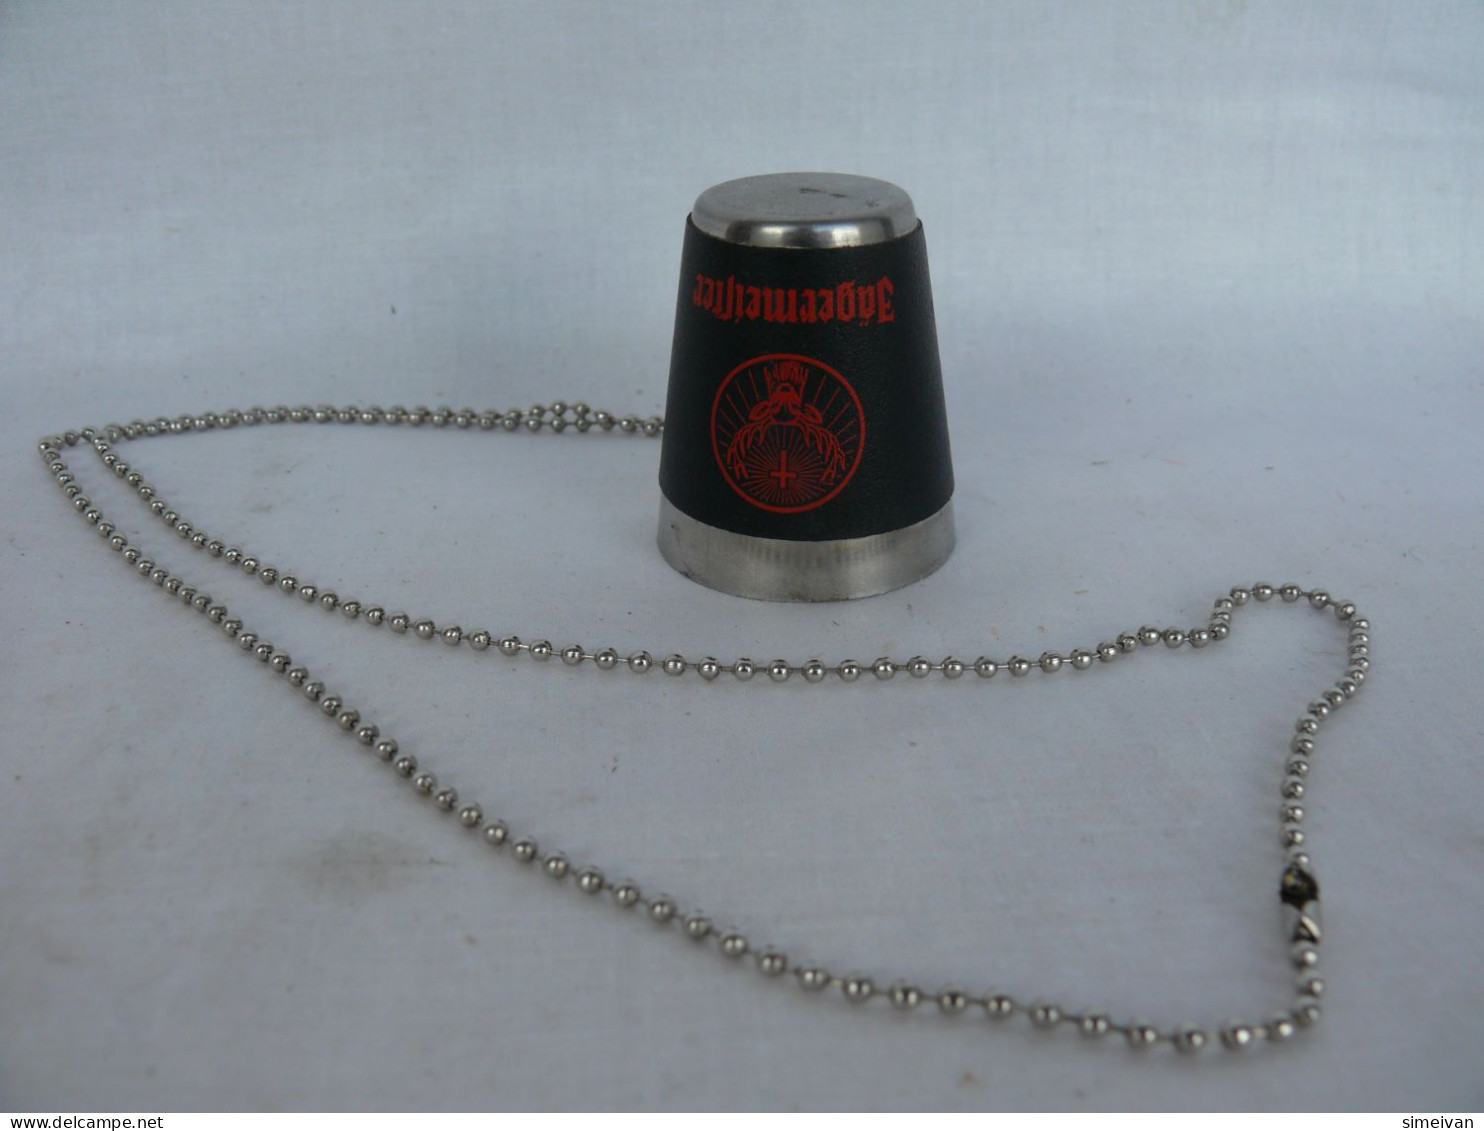 Interesting Jägermeister Small Cup Necklace #1503 - Tazze